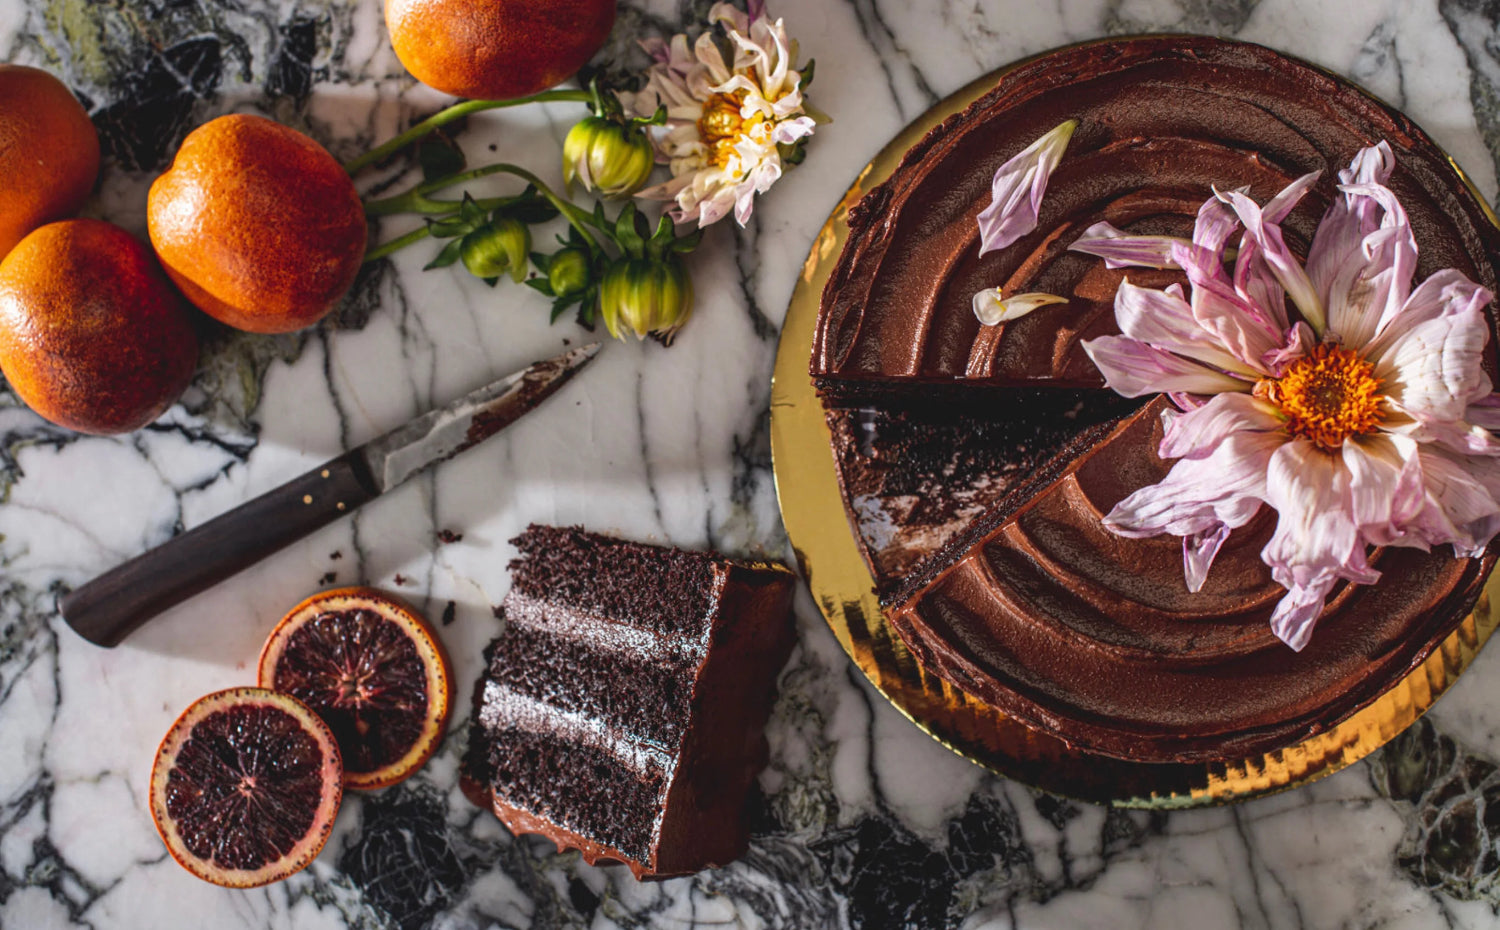 A spread of food and botanicals surrounding a cake